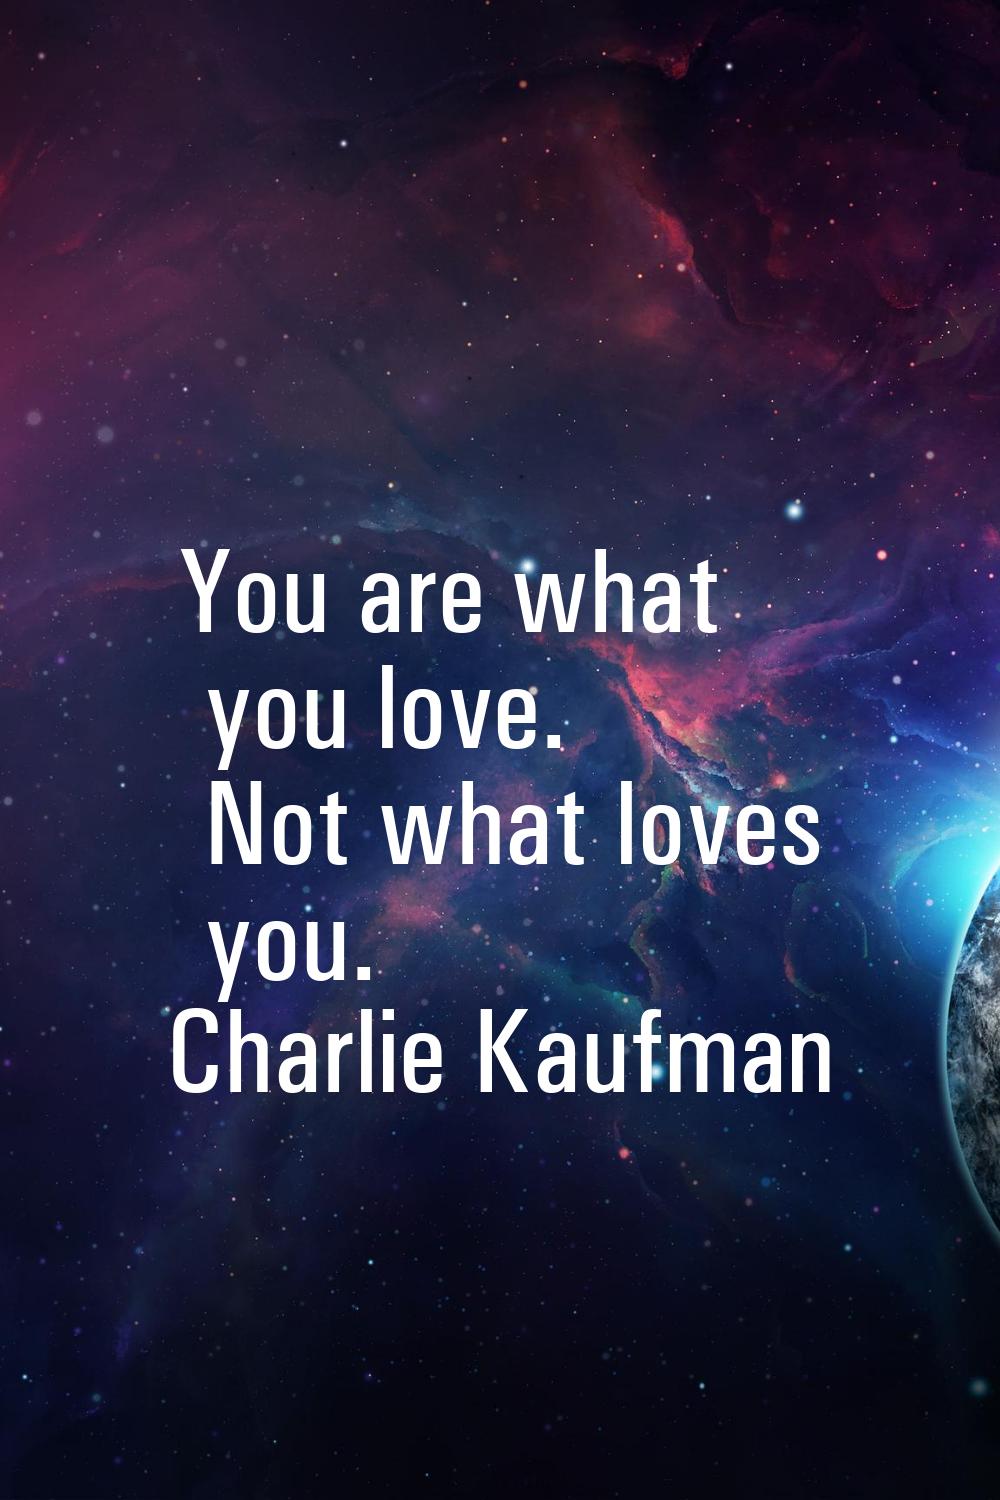 You are what you love. Not what loves you.